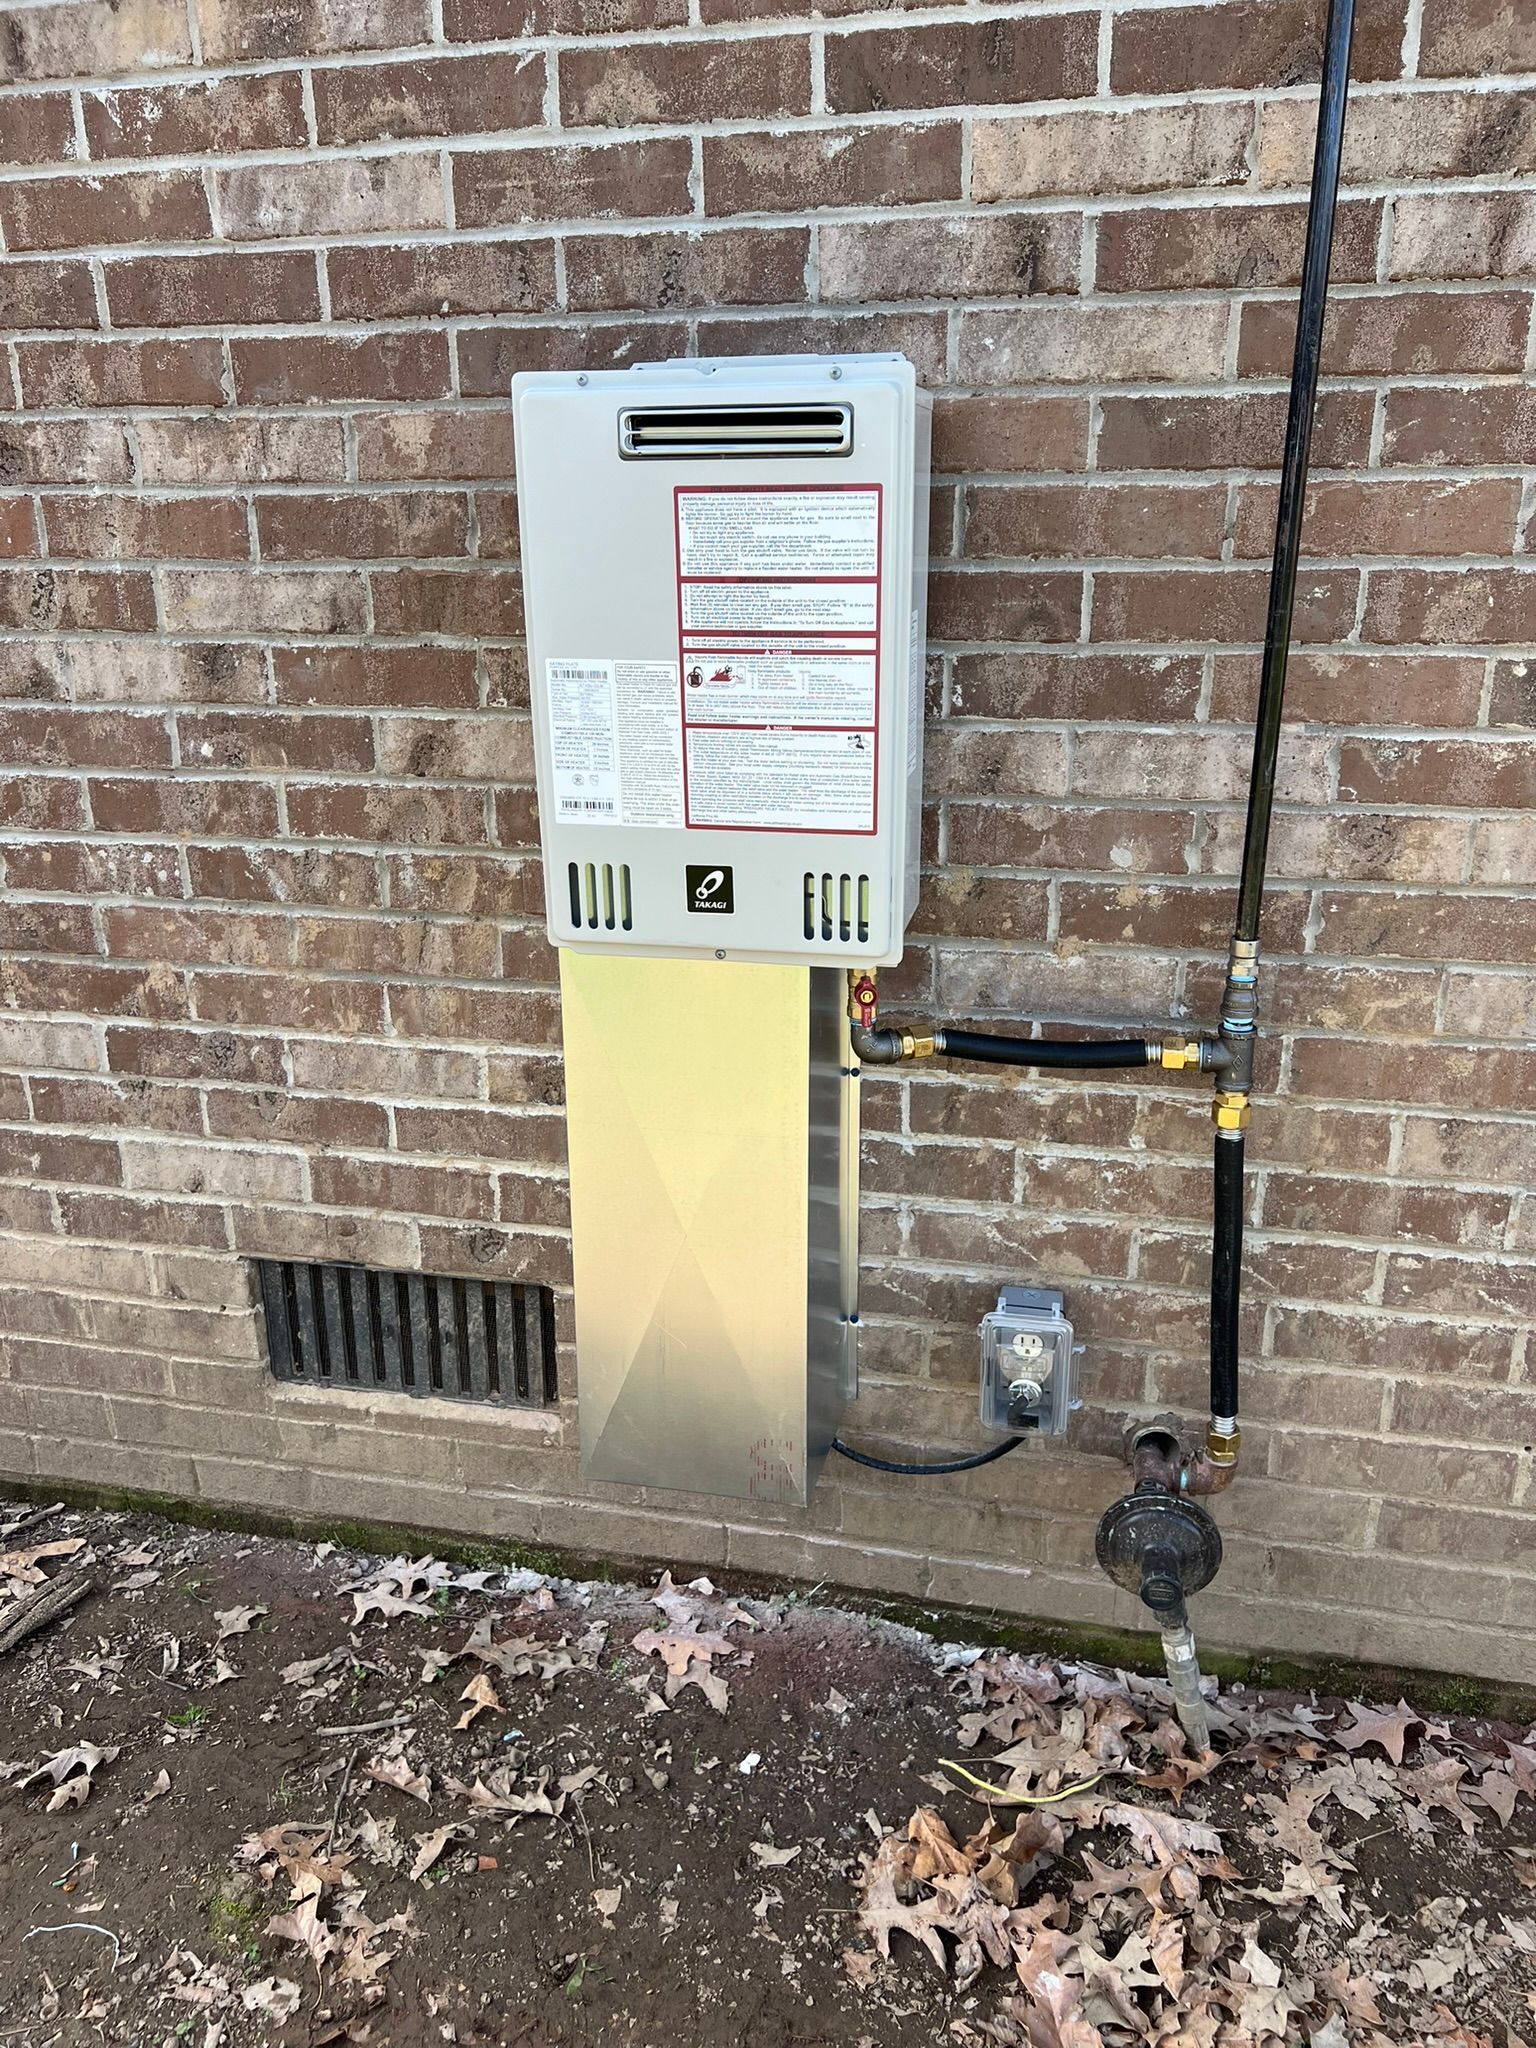 A gas water heater is installed on the side of a brick building.